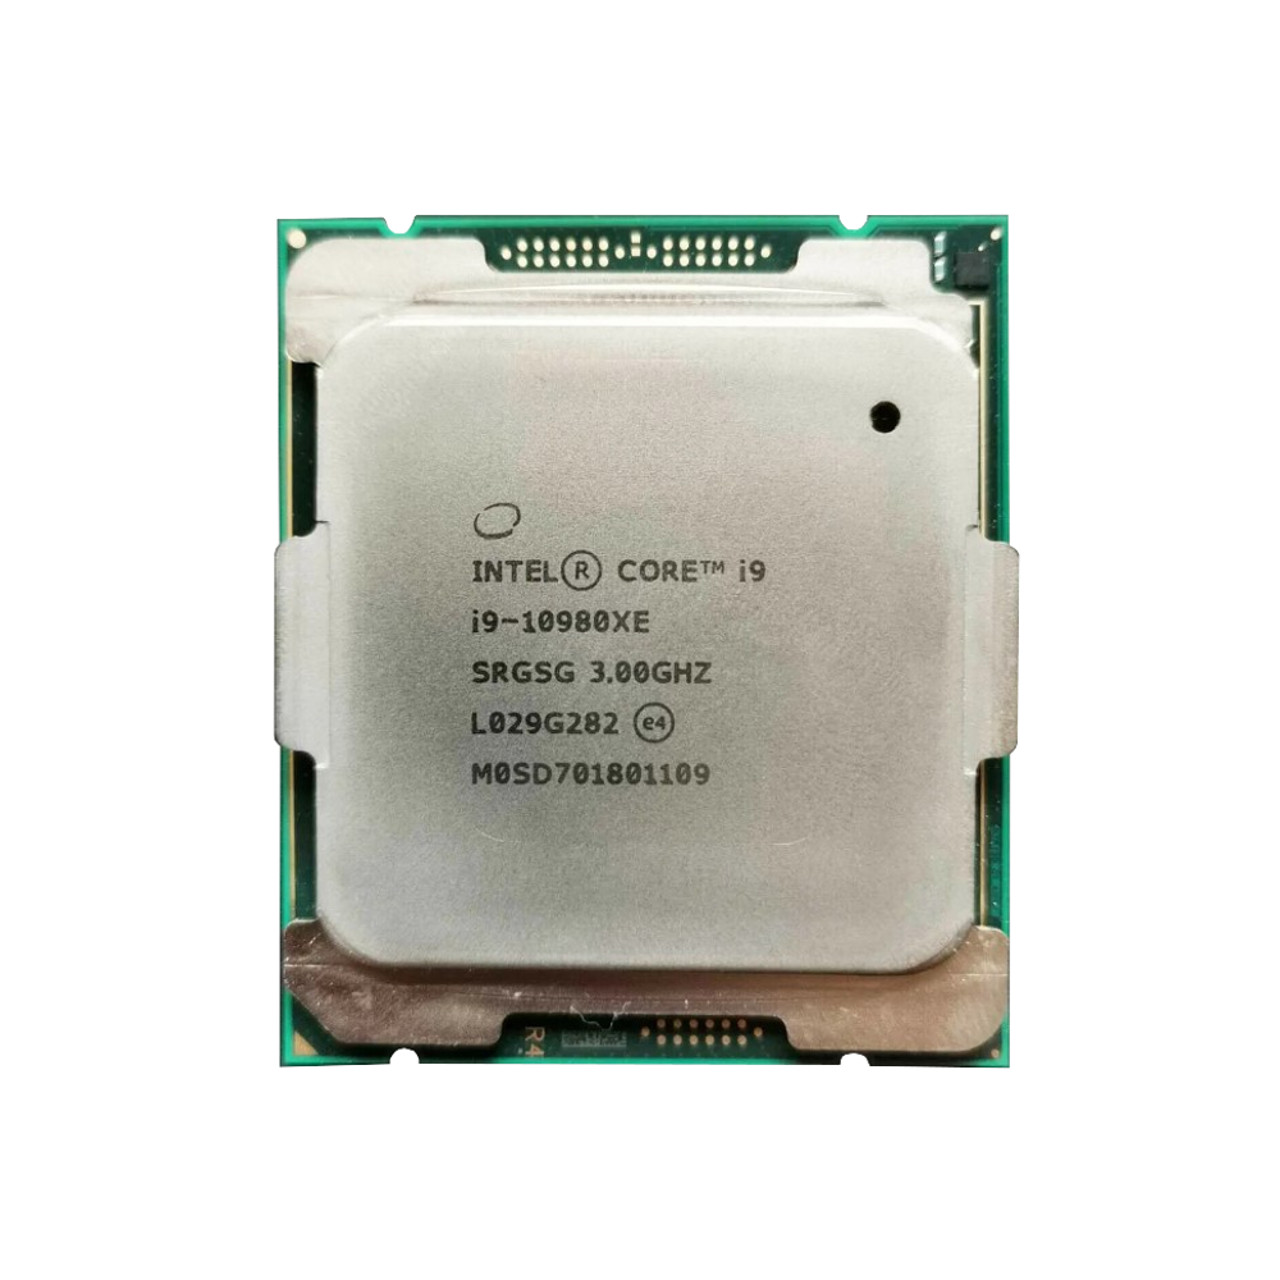 Intel Core i9-10980XE - 3.00GHz - 18 Cores - 36 Threads - LGA2066 - 2933MHz  - SRGSG - Used